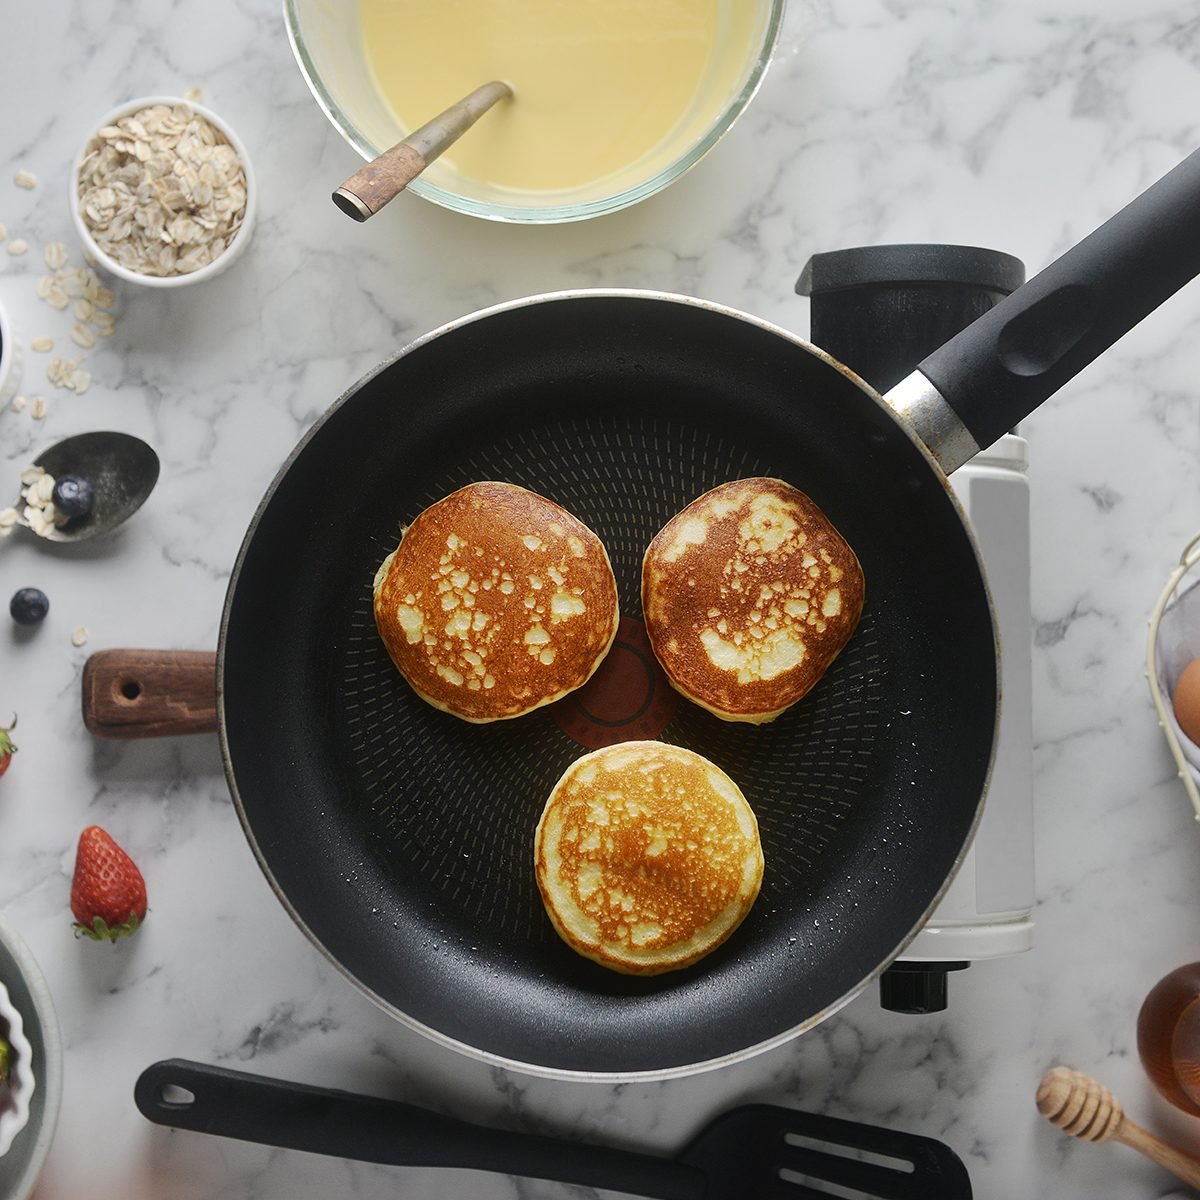 https://www.tasteofhome.com/wp-content/uploads/2020/02/pancakes-onto-the-pan-concept-of-cooking-GettyImages-1148827579.jpg